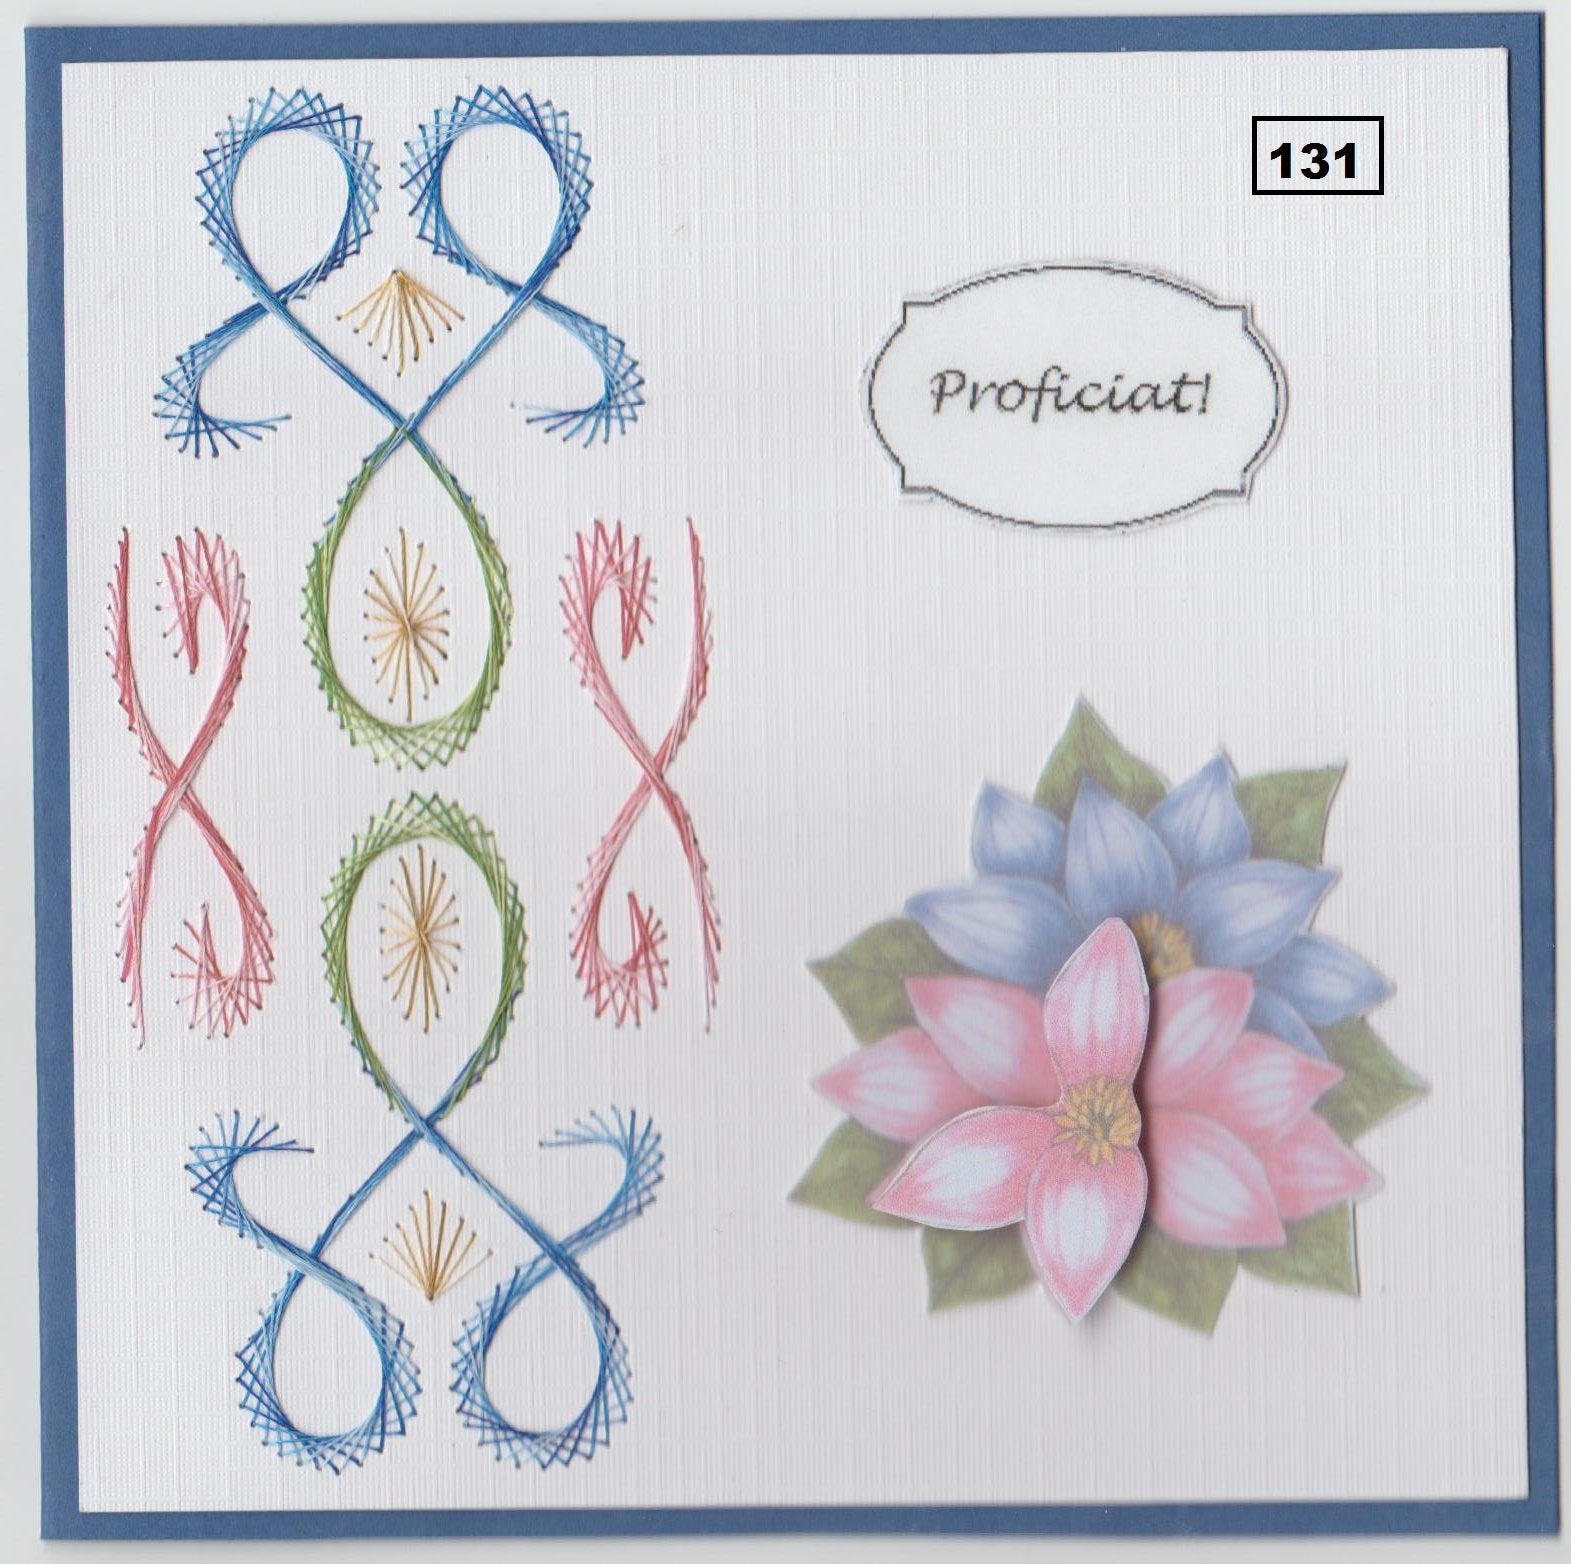 Laura's Design Digital Embroidery Pattern - Small Elements